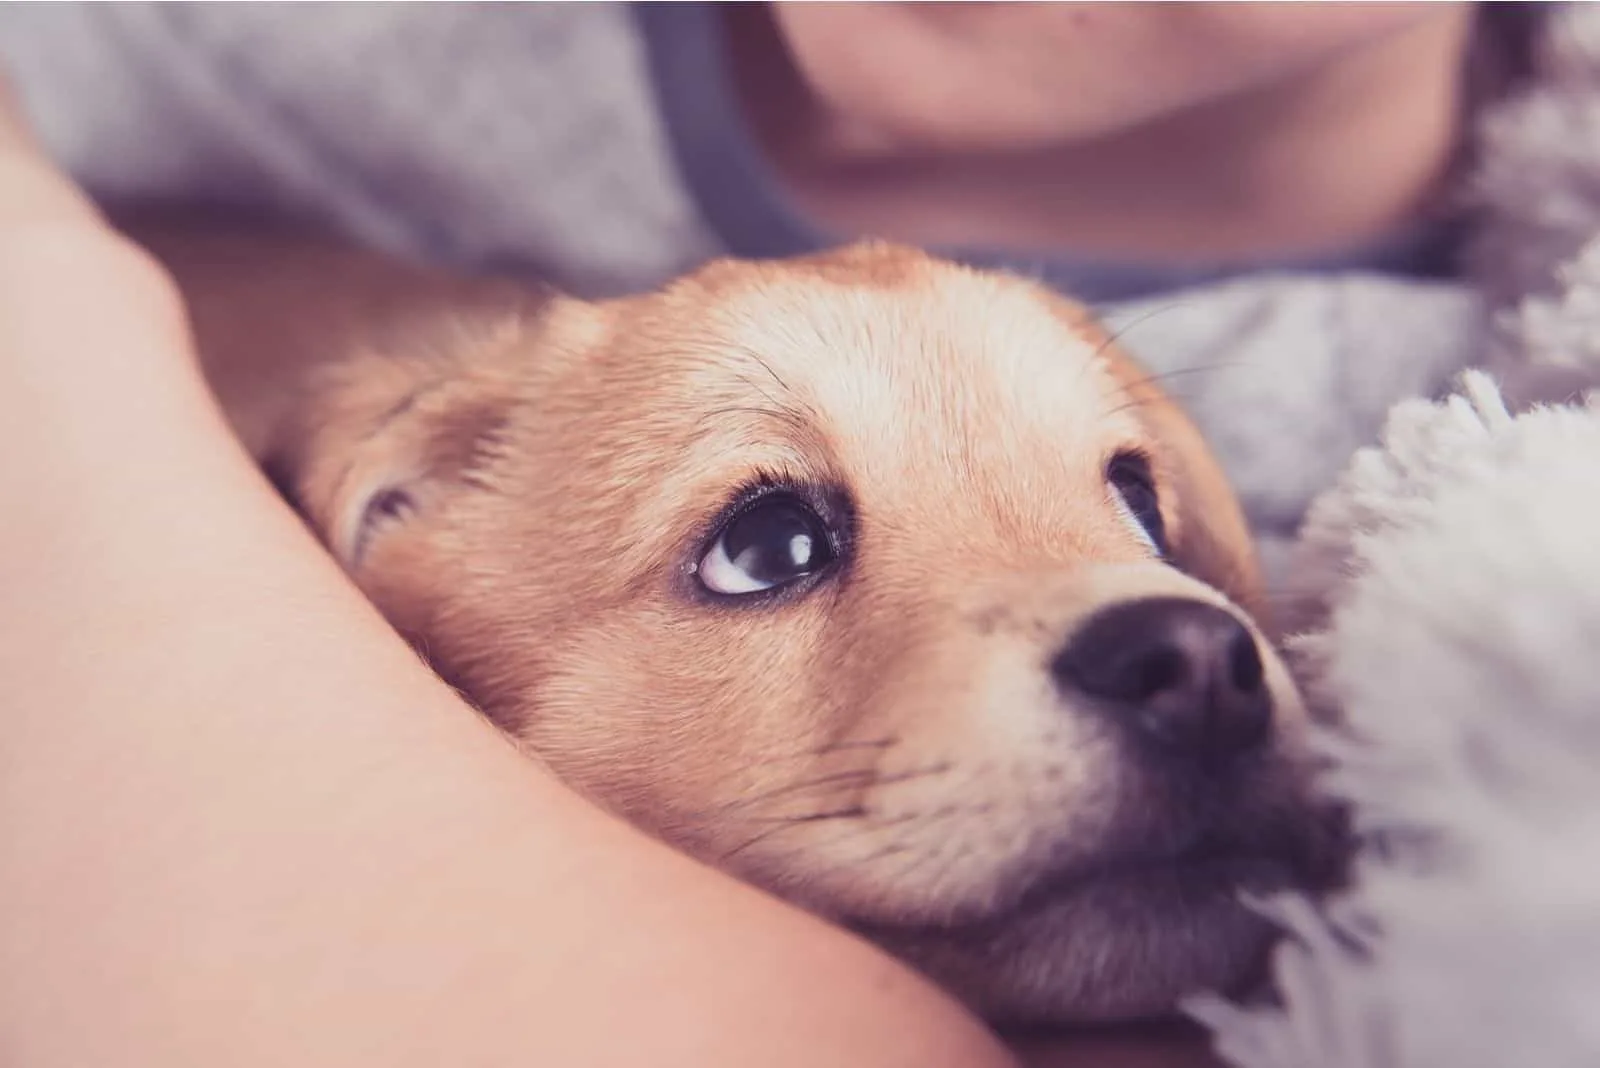 Young puppy dog hugged by the owner in focus image